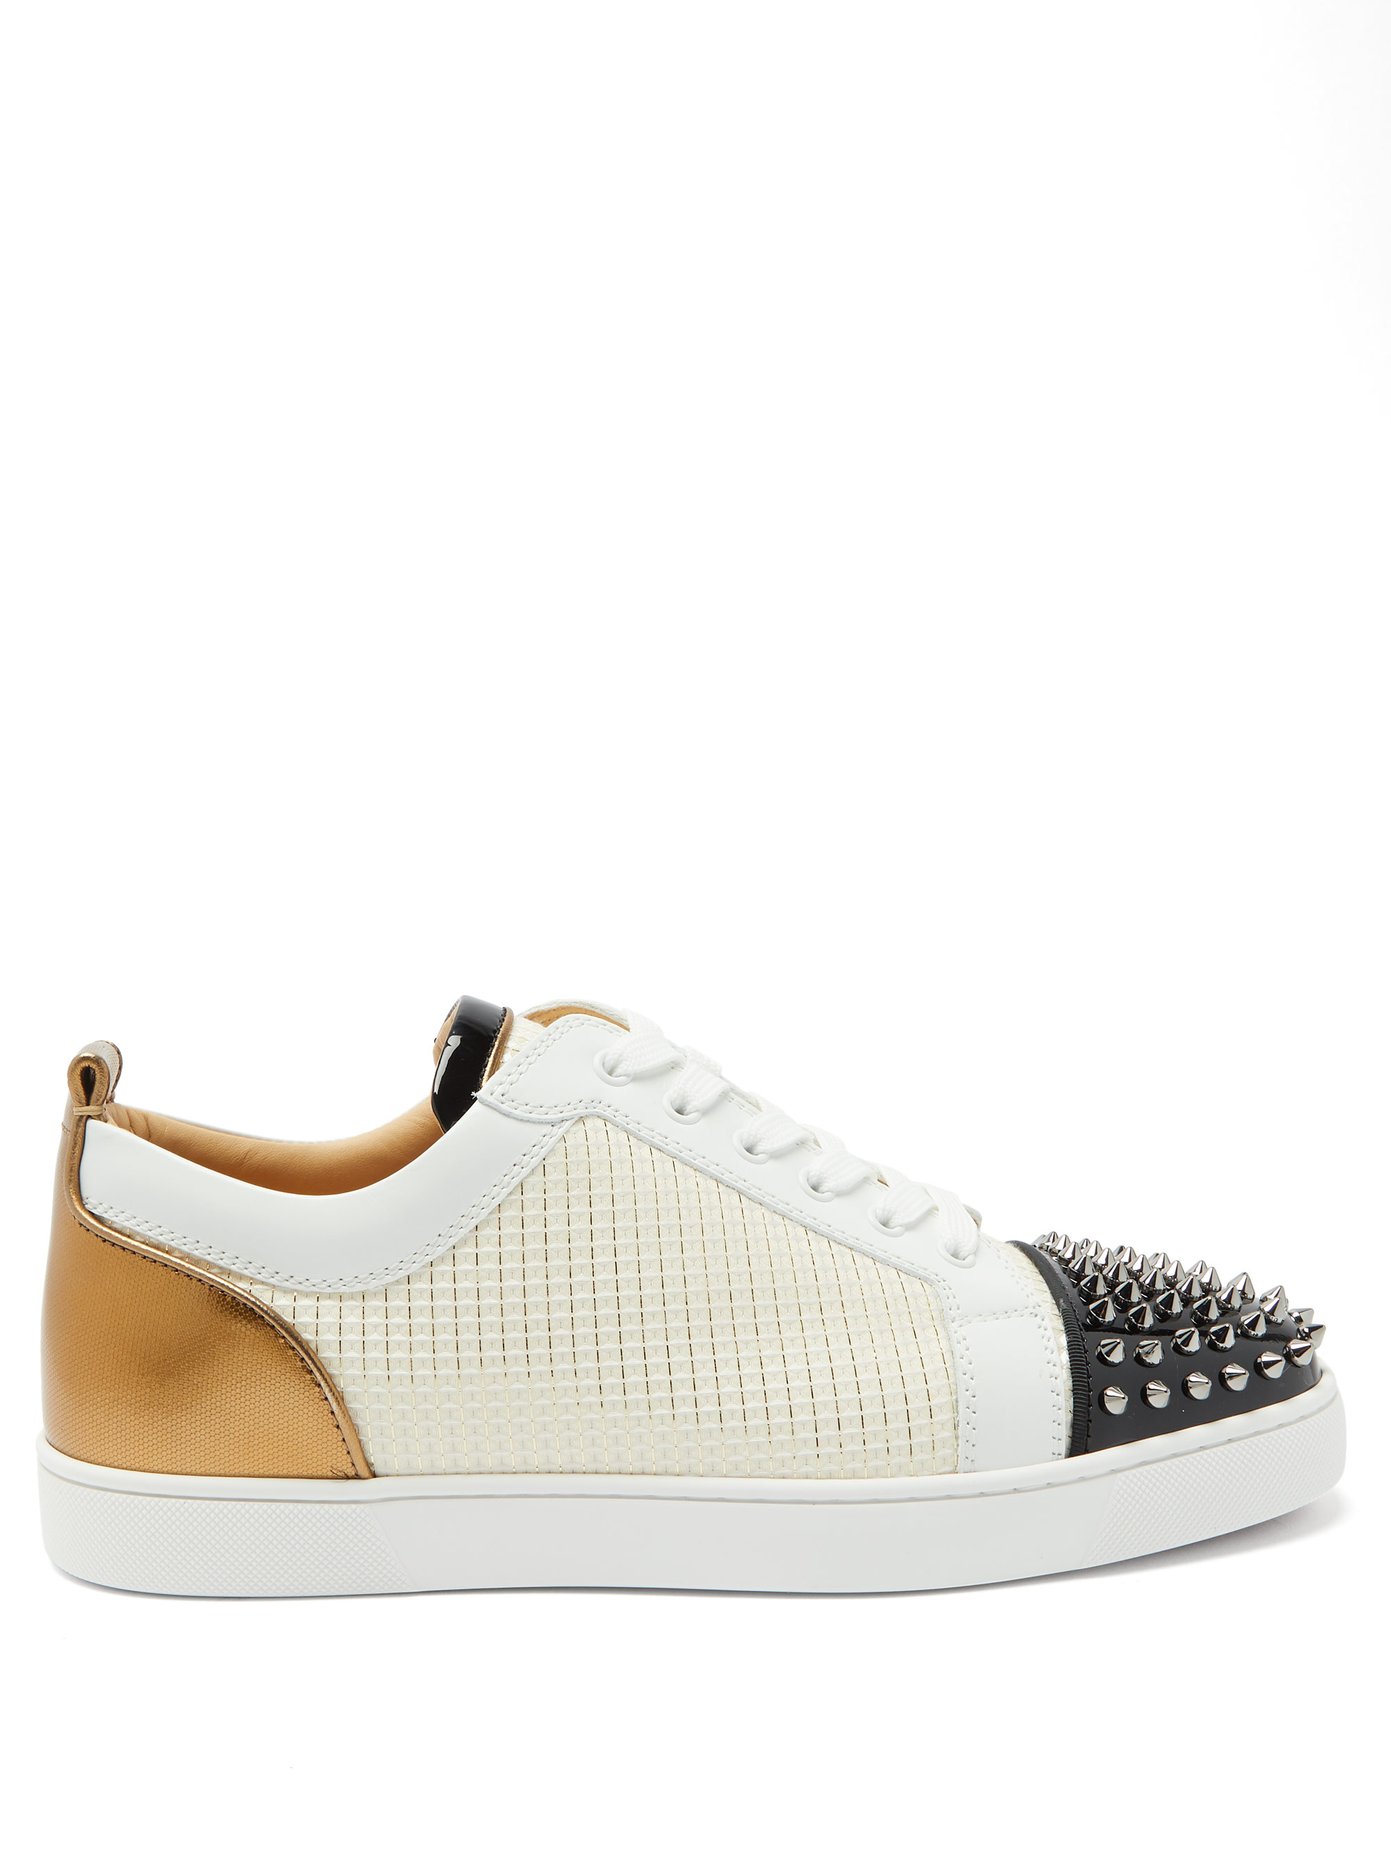 white louboutin trainers spikes